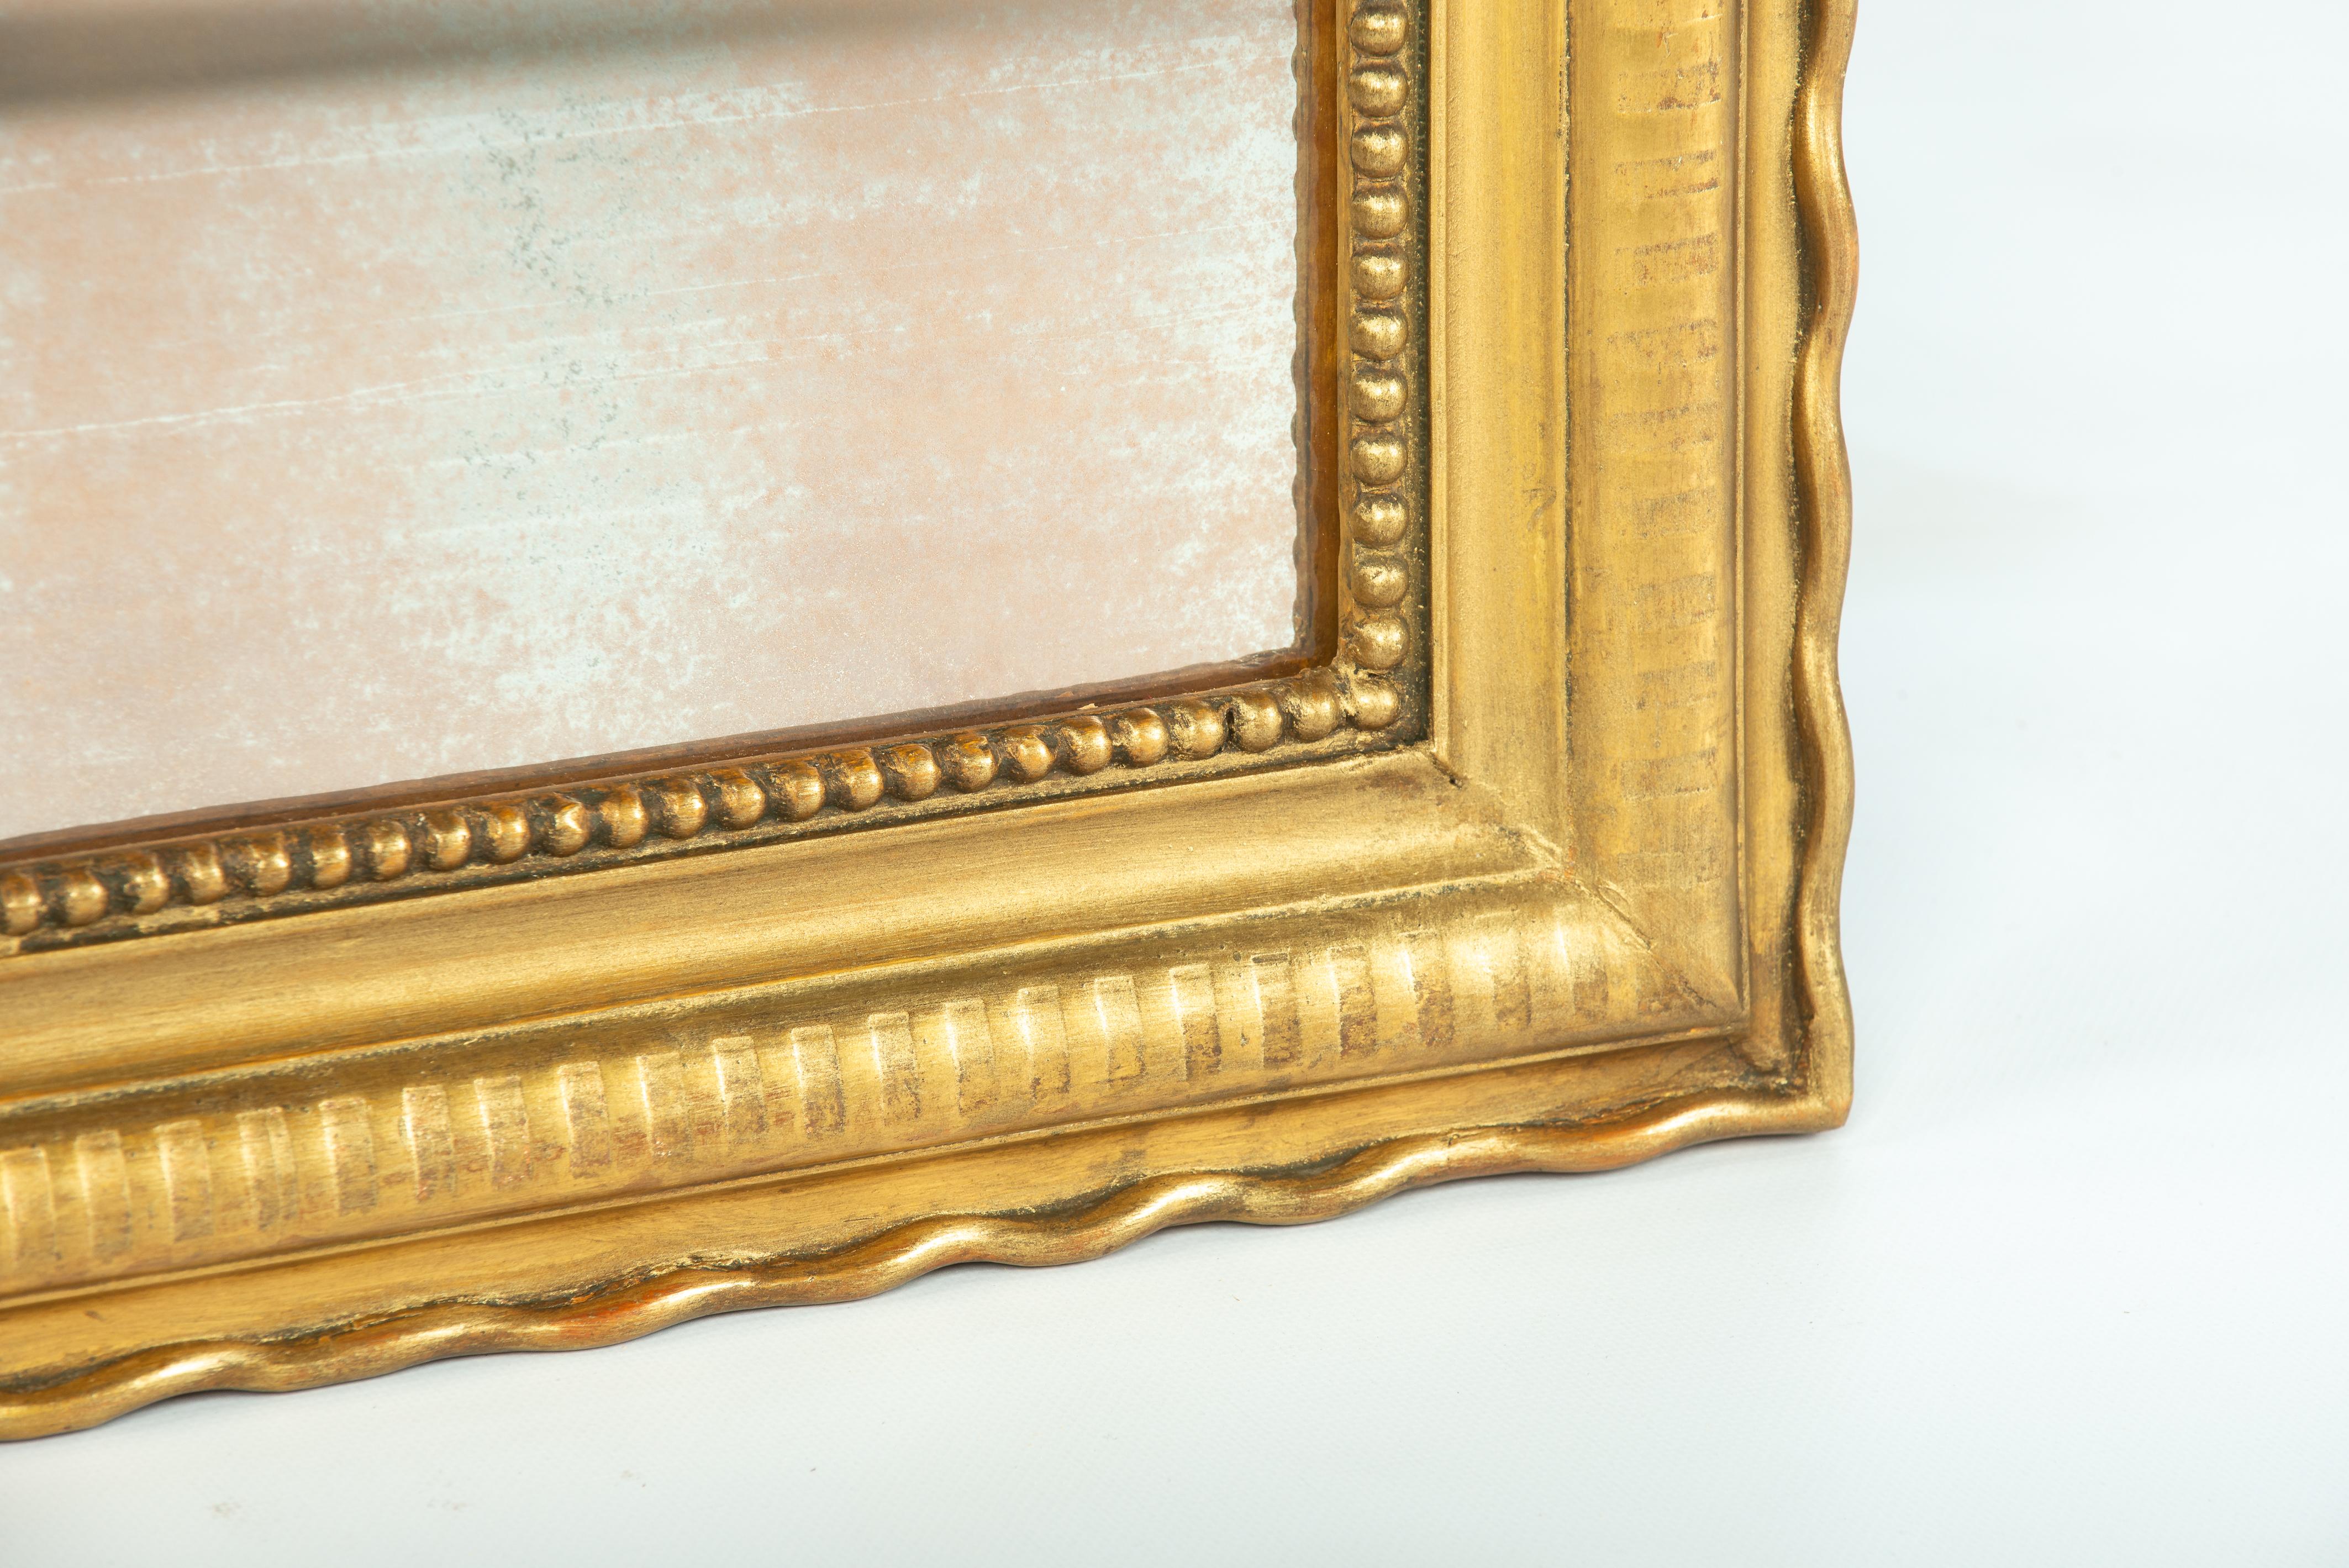 Offered here is a beautiful antique gold leaf-gilded Louis Philippe mirror from France. This mirror dates back to around 1870 and features rounded upper corners characteristic of the Louis Philippe style. Crafted in the south of France, it is